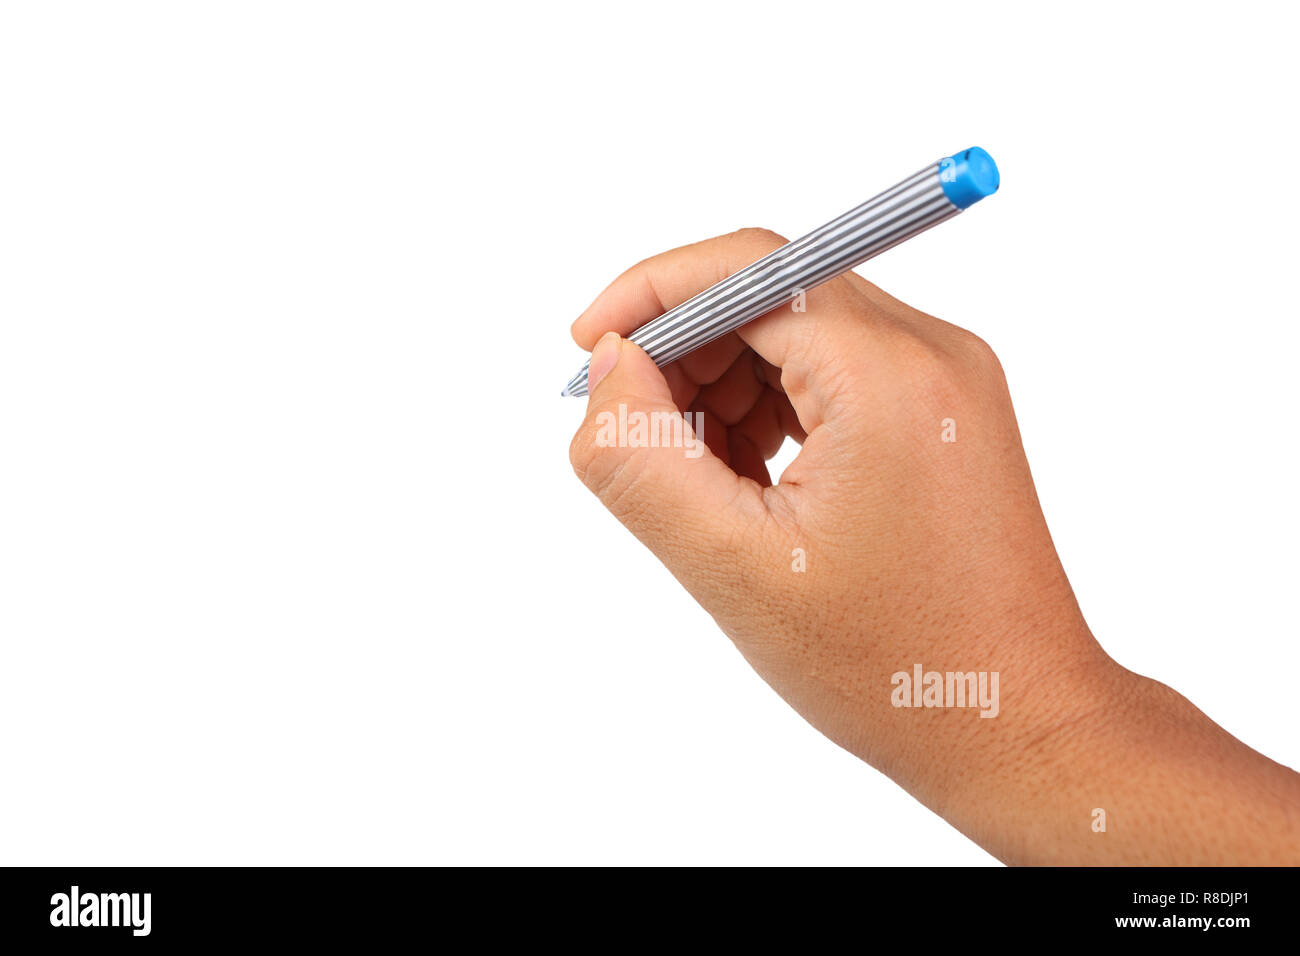 Photo image of a hand holding pen in writing position isolated on white with empty space Stock Photo